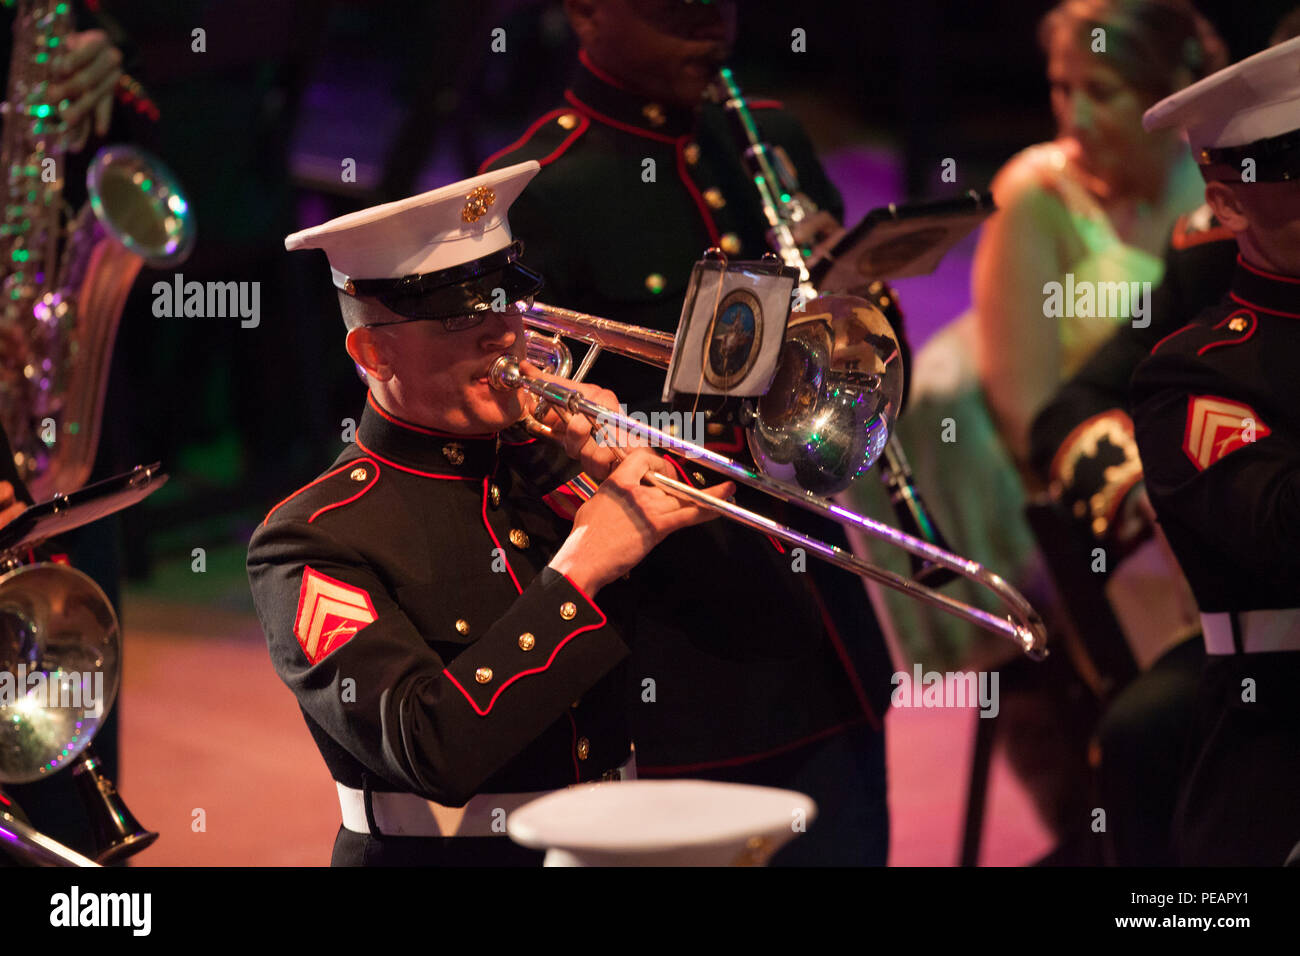 U.S. Marines Cpl. Nathan Scheffler, French Horn, with Marine Corps Band New Orleans performs for the celebration of the 240th Marine Corps Birthday Ball at Mardi Gras World, New Orleans, La., Nov. 21, 2015. This year’s celebration honors those past, present, and future Marines throughout history and marks the 240th Marine Corps Birthday since its founding on Nov. 10, 1775. (U.S. Marine Corps photo by Kimberly Aguirre/ Released) Stock Photo